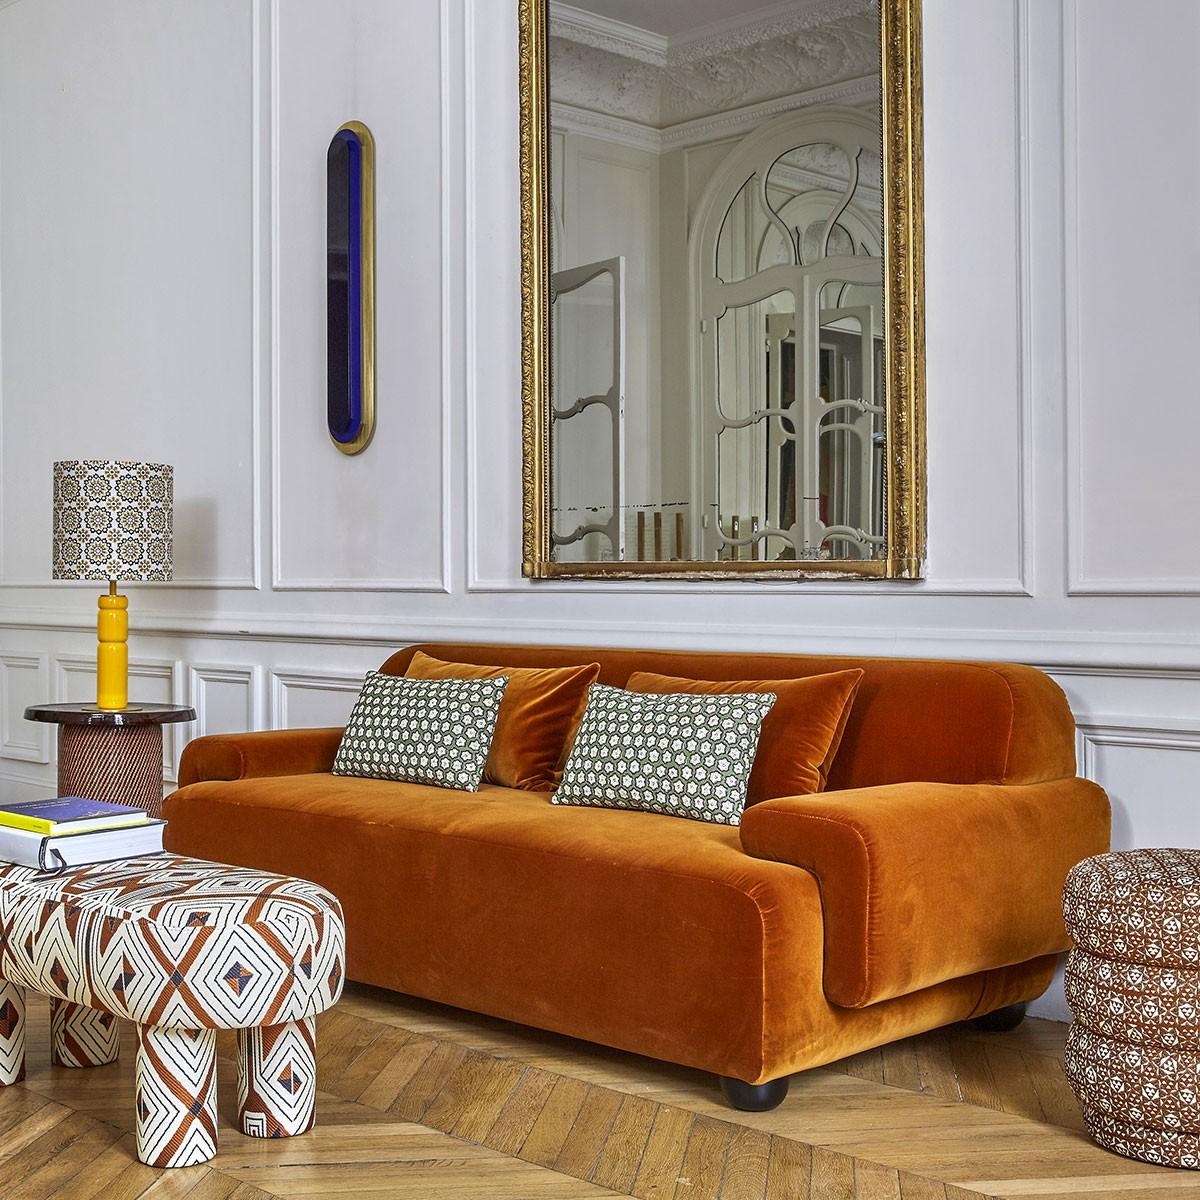 Popus Editions Lena 3 seater sofa in saffron antwerp linen upholstery

It looks like it's straight out of a movie, with its generous curves and wide armrests. It is a real invitation to spend long Sundays with the family, comfortably seated in